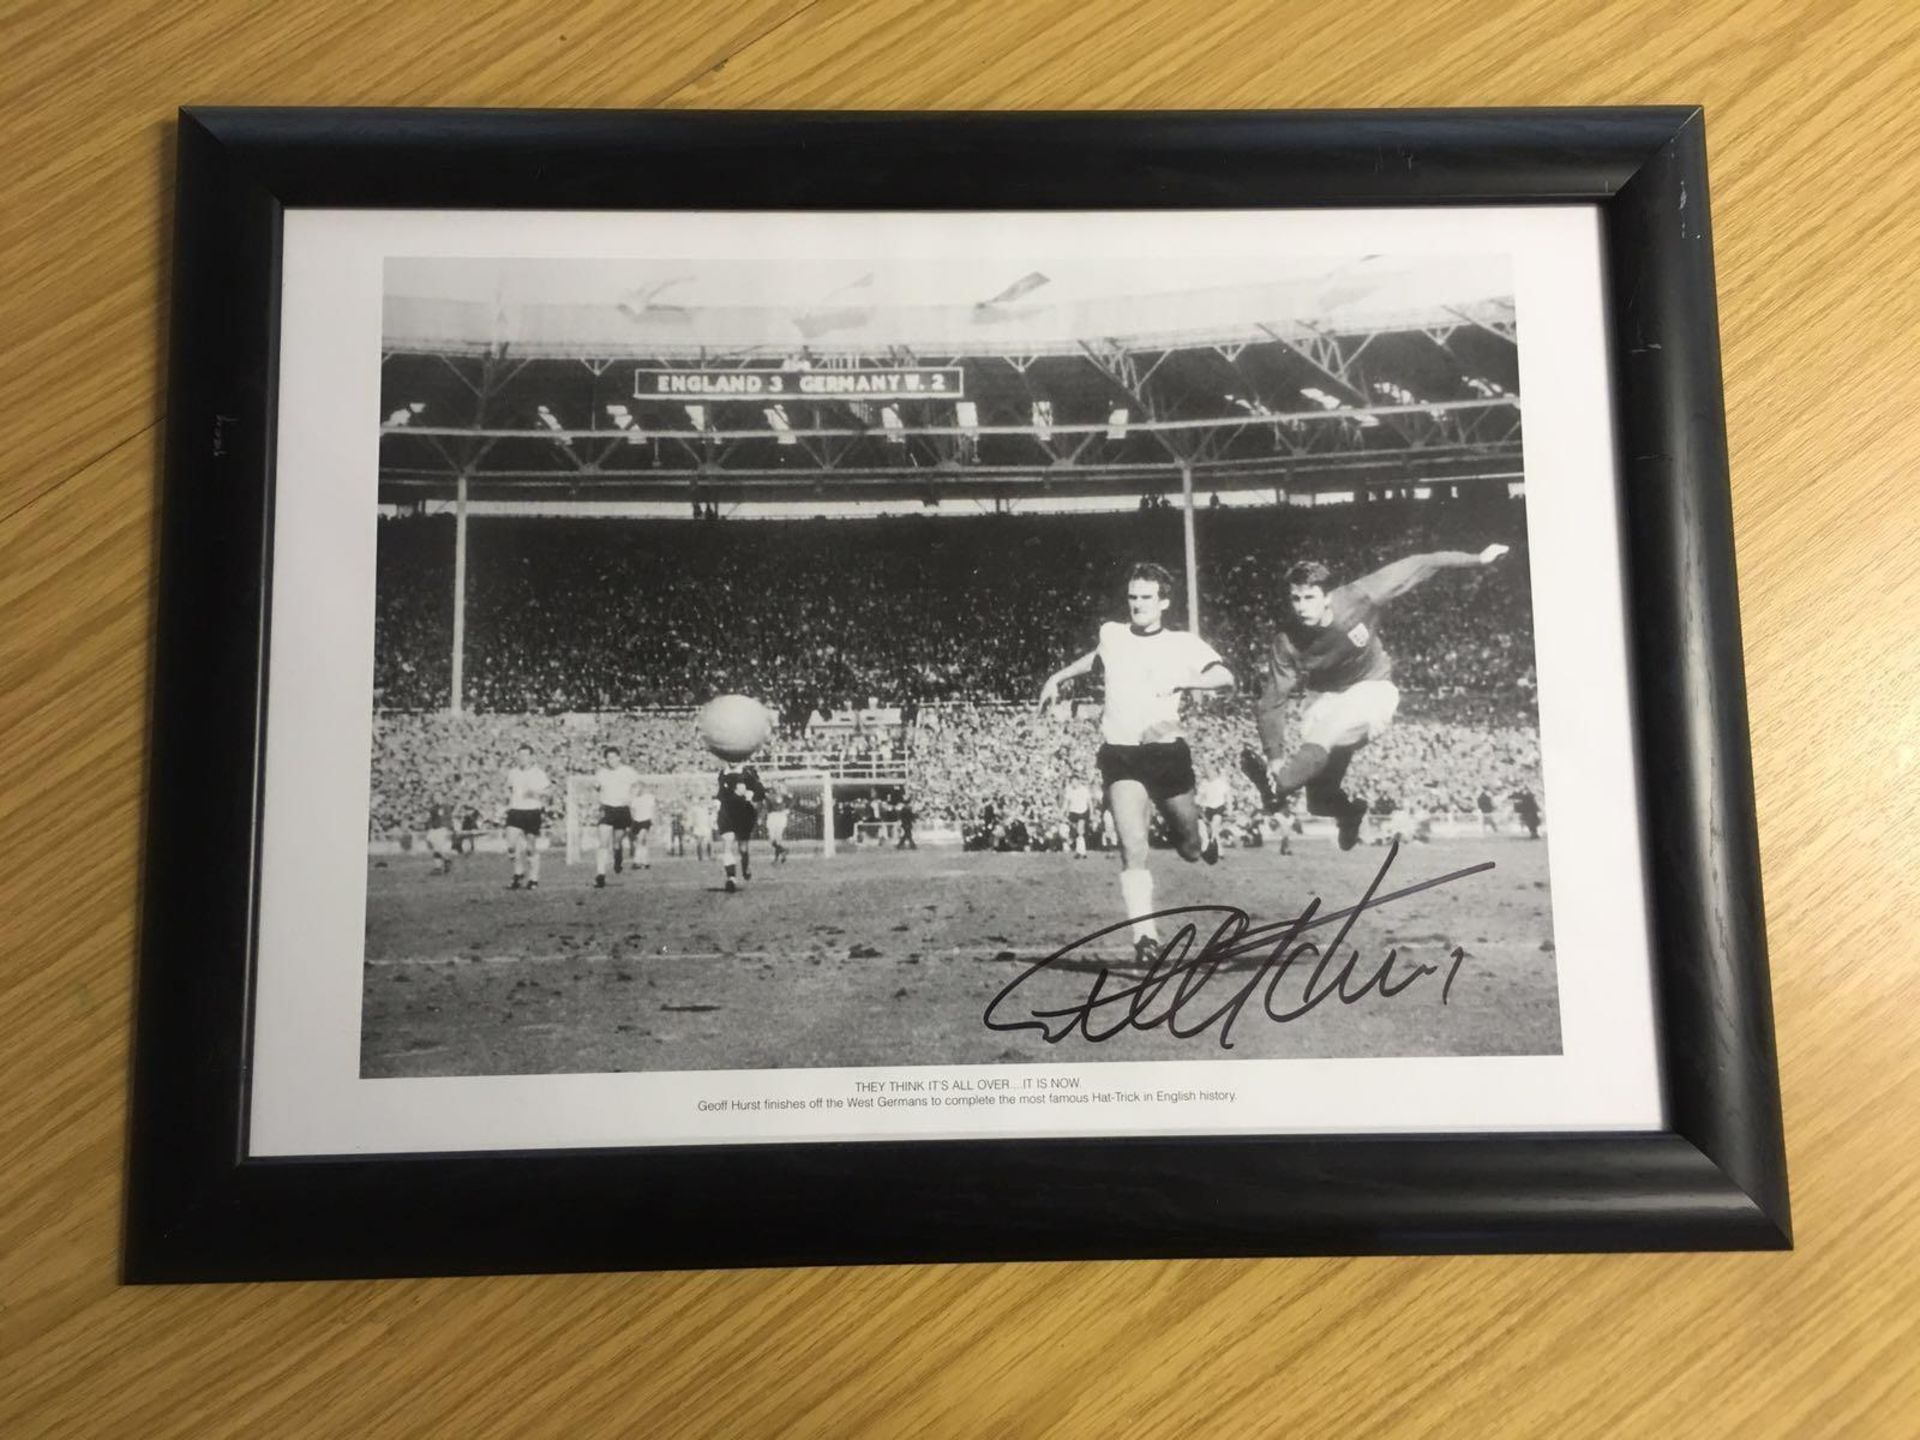 Geoff hurst hand signed pic of his hatrick goal for England beating W Germany 1966 World Cup final